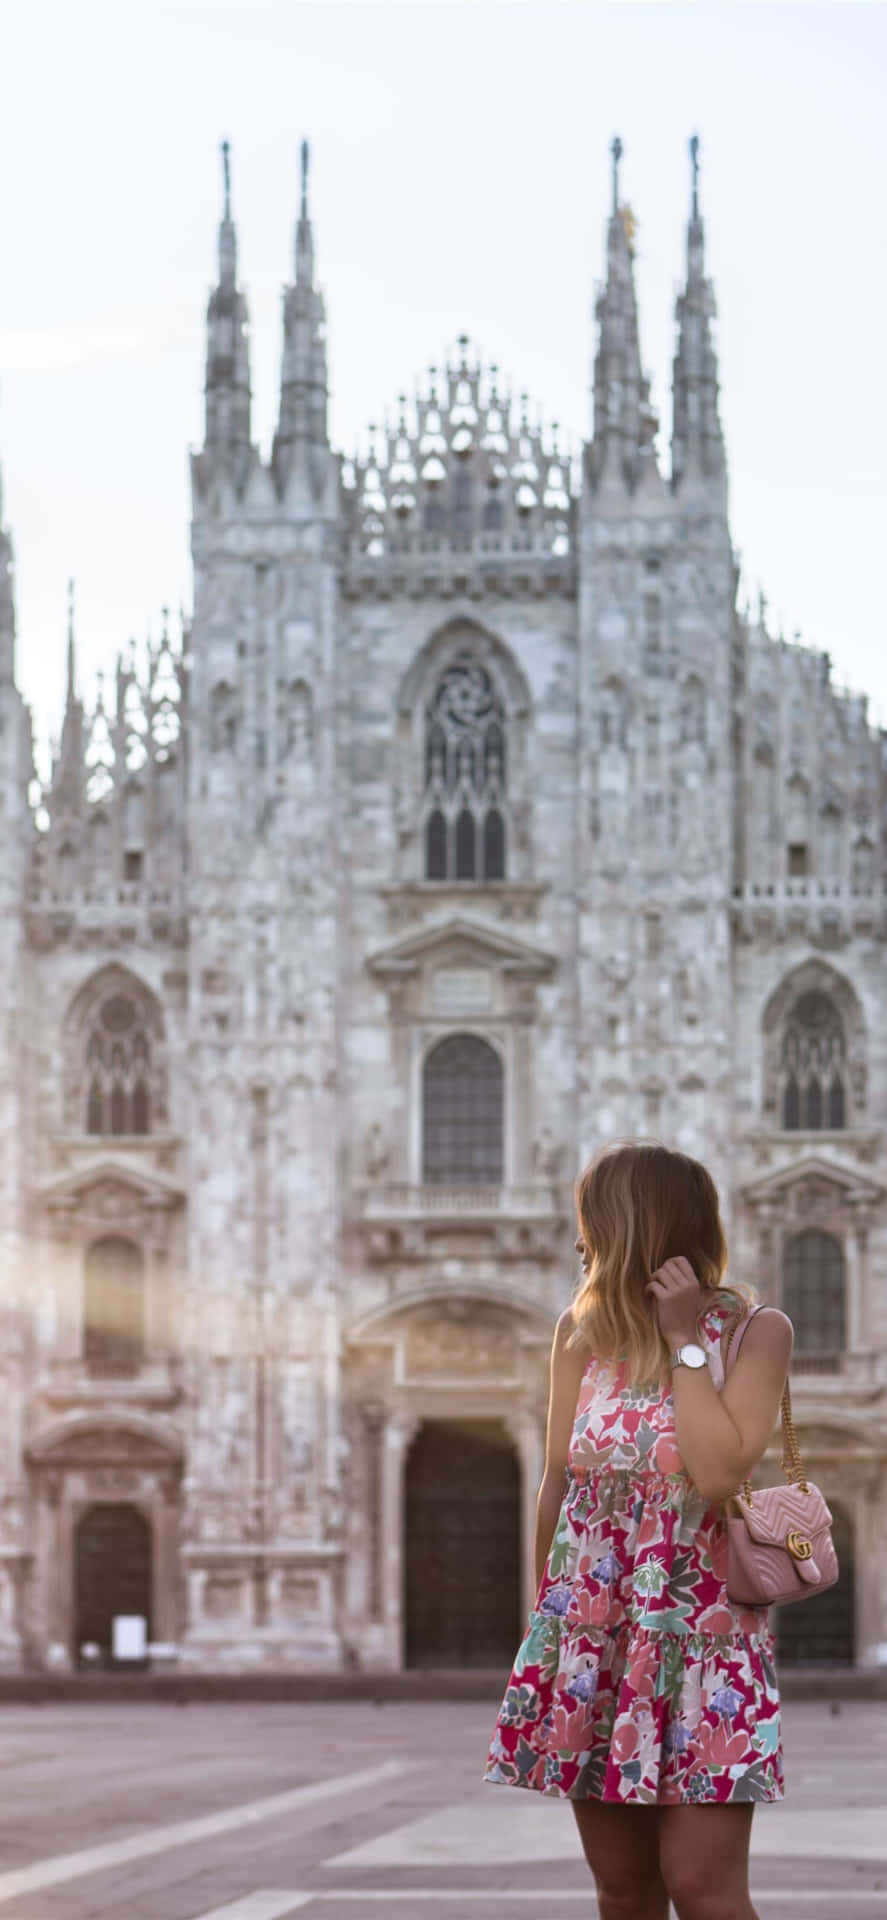 Woman In Front Of Milan Cathedral Wallpaper